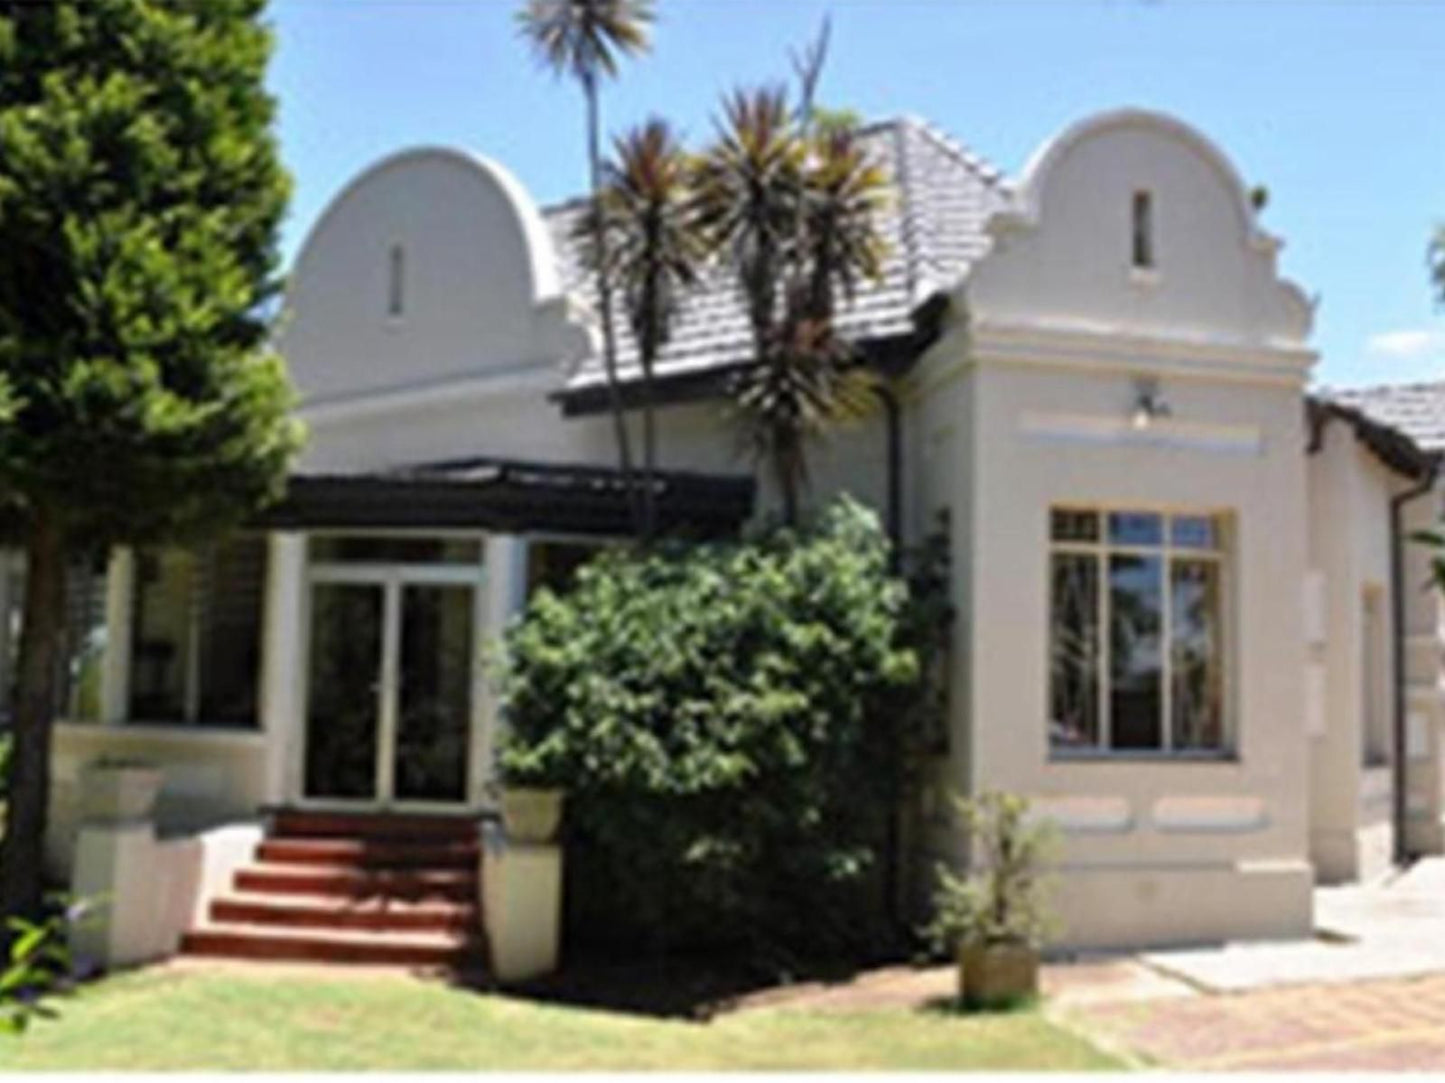 Manor Guest House Lydenburg Mpumalanga South Africa House, Building, Architecture